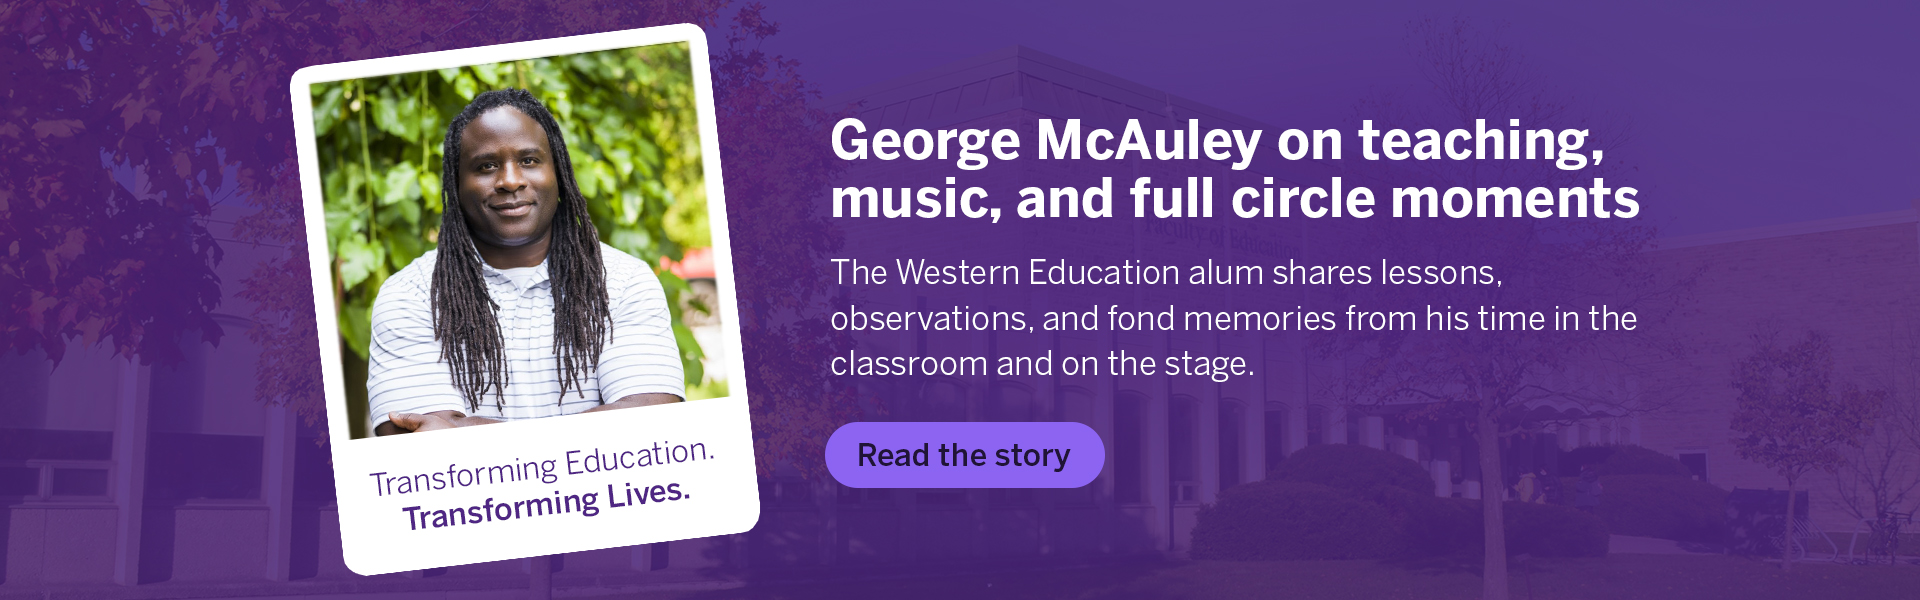 An image of Western Education alum George McAuley accompanied by text promoting a profile on him.